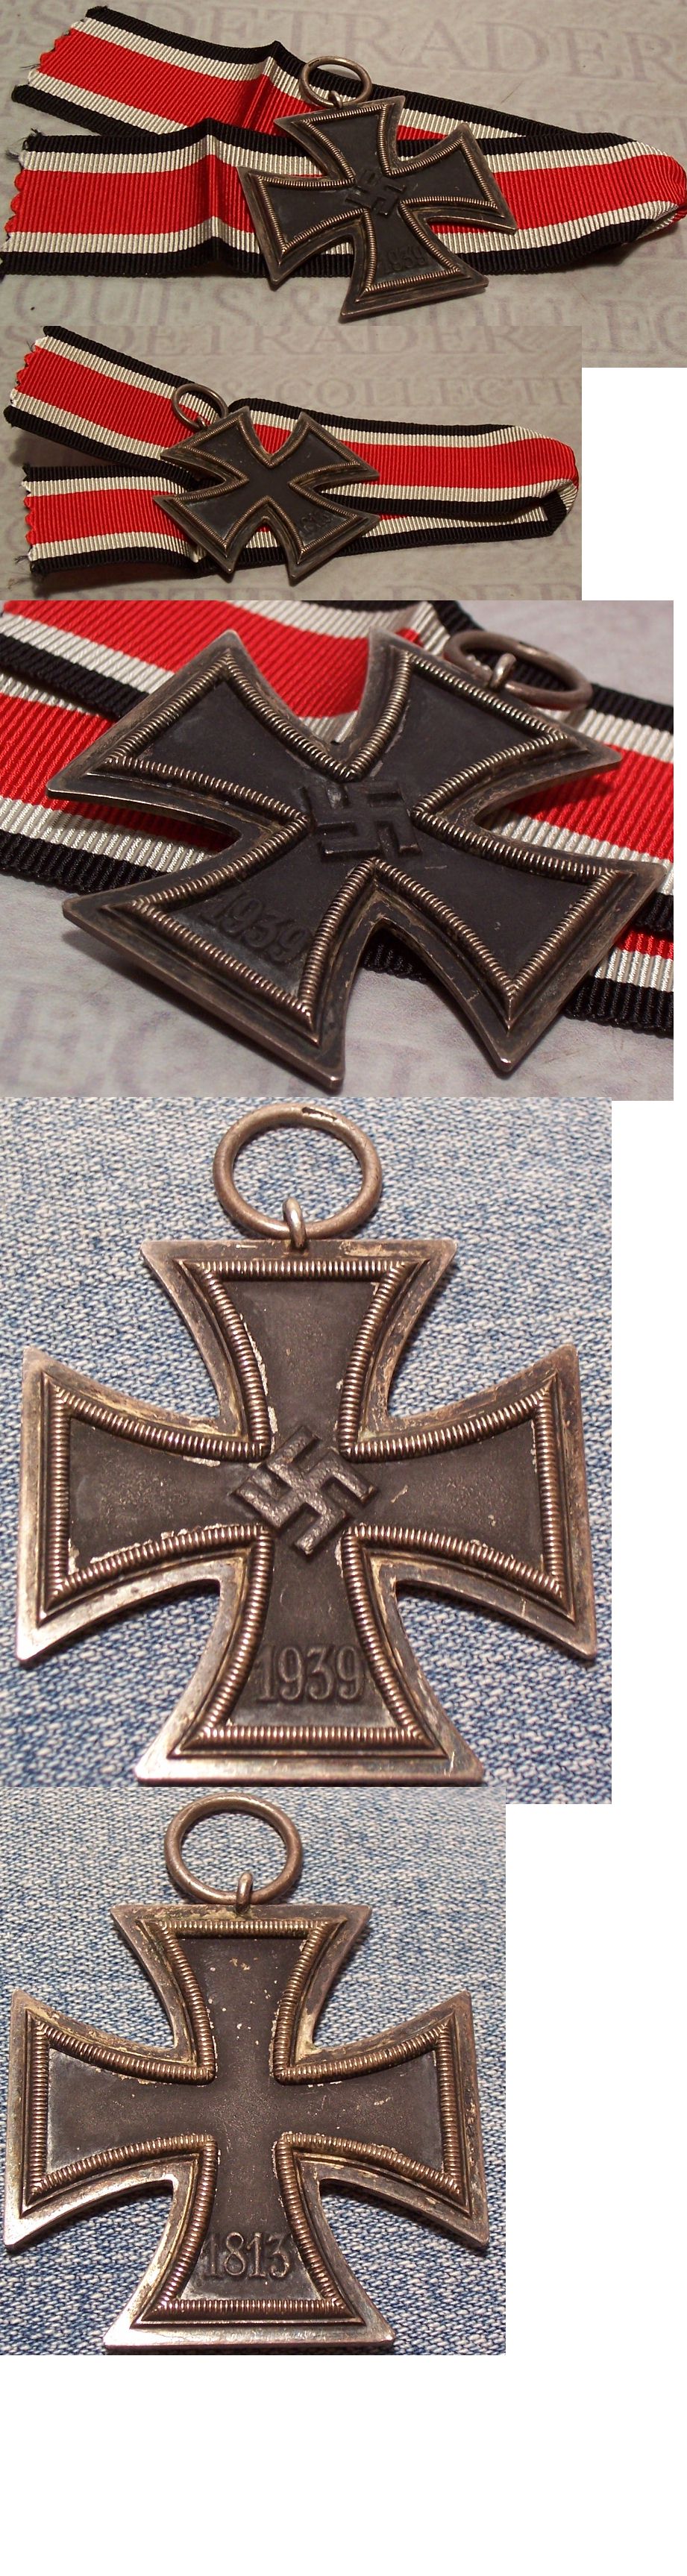 2nd Class Iron Cross by Beck, Hassinger & Co